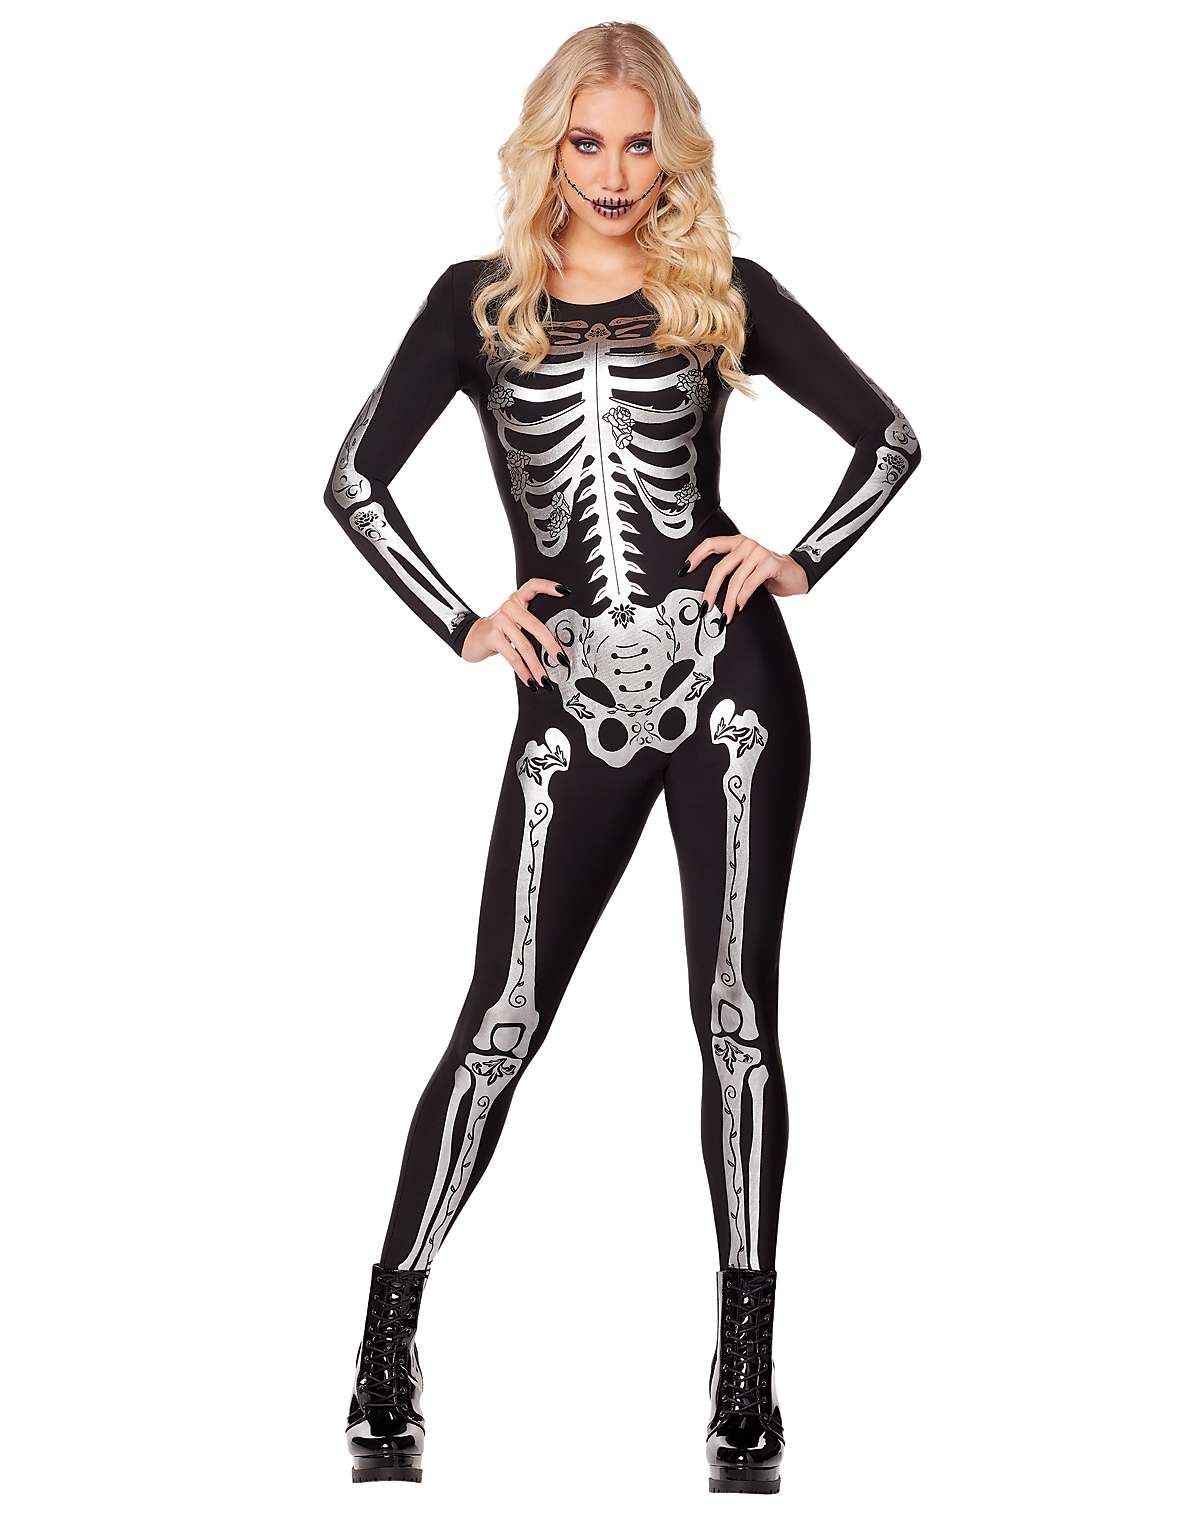 Bone-Chilling Skeleton Costumes and Décor for the (Halloween)